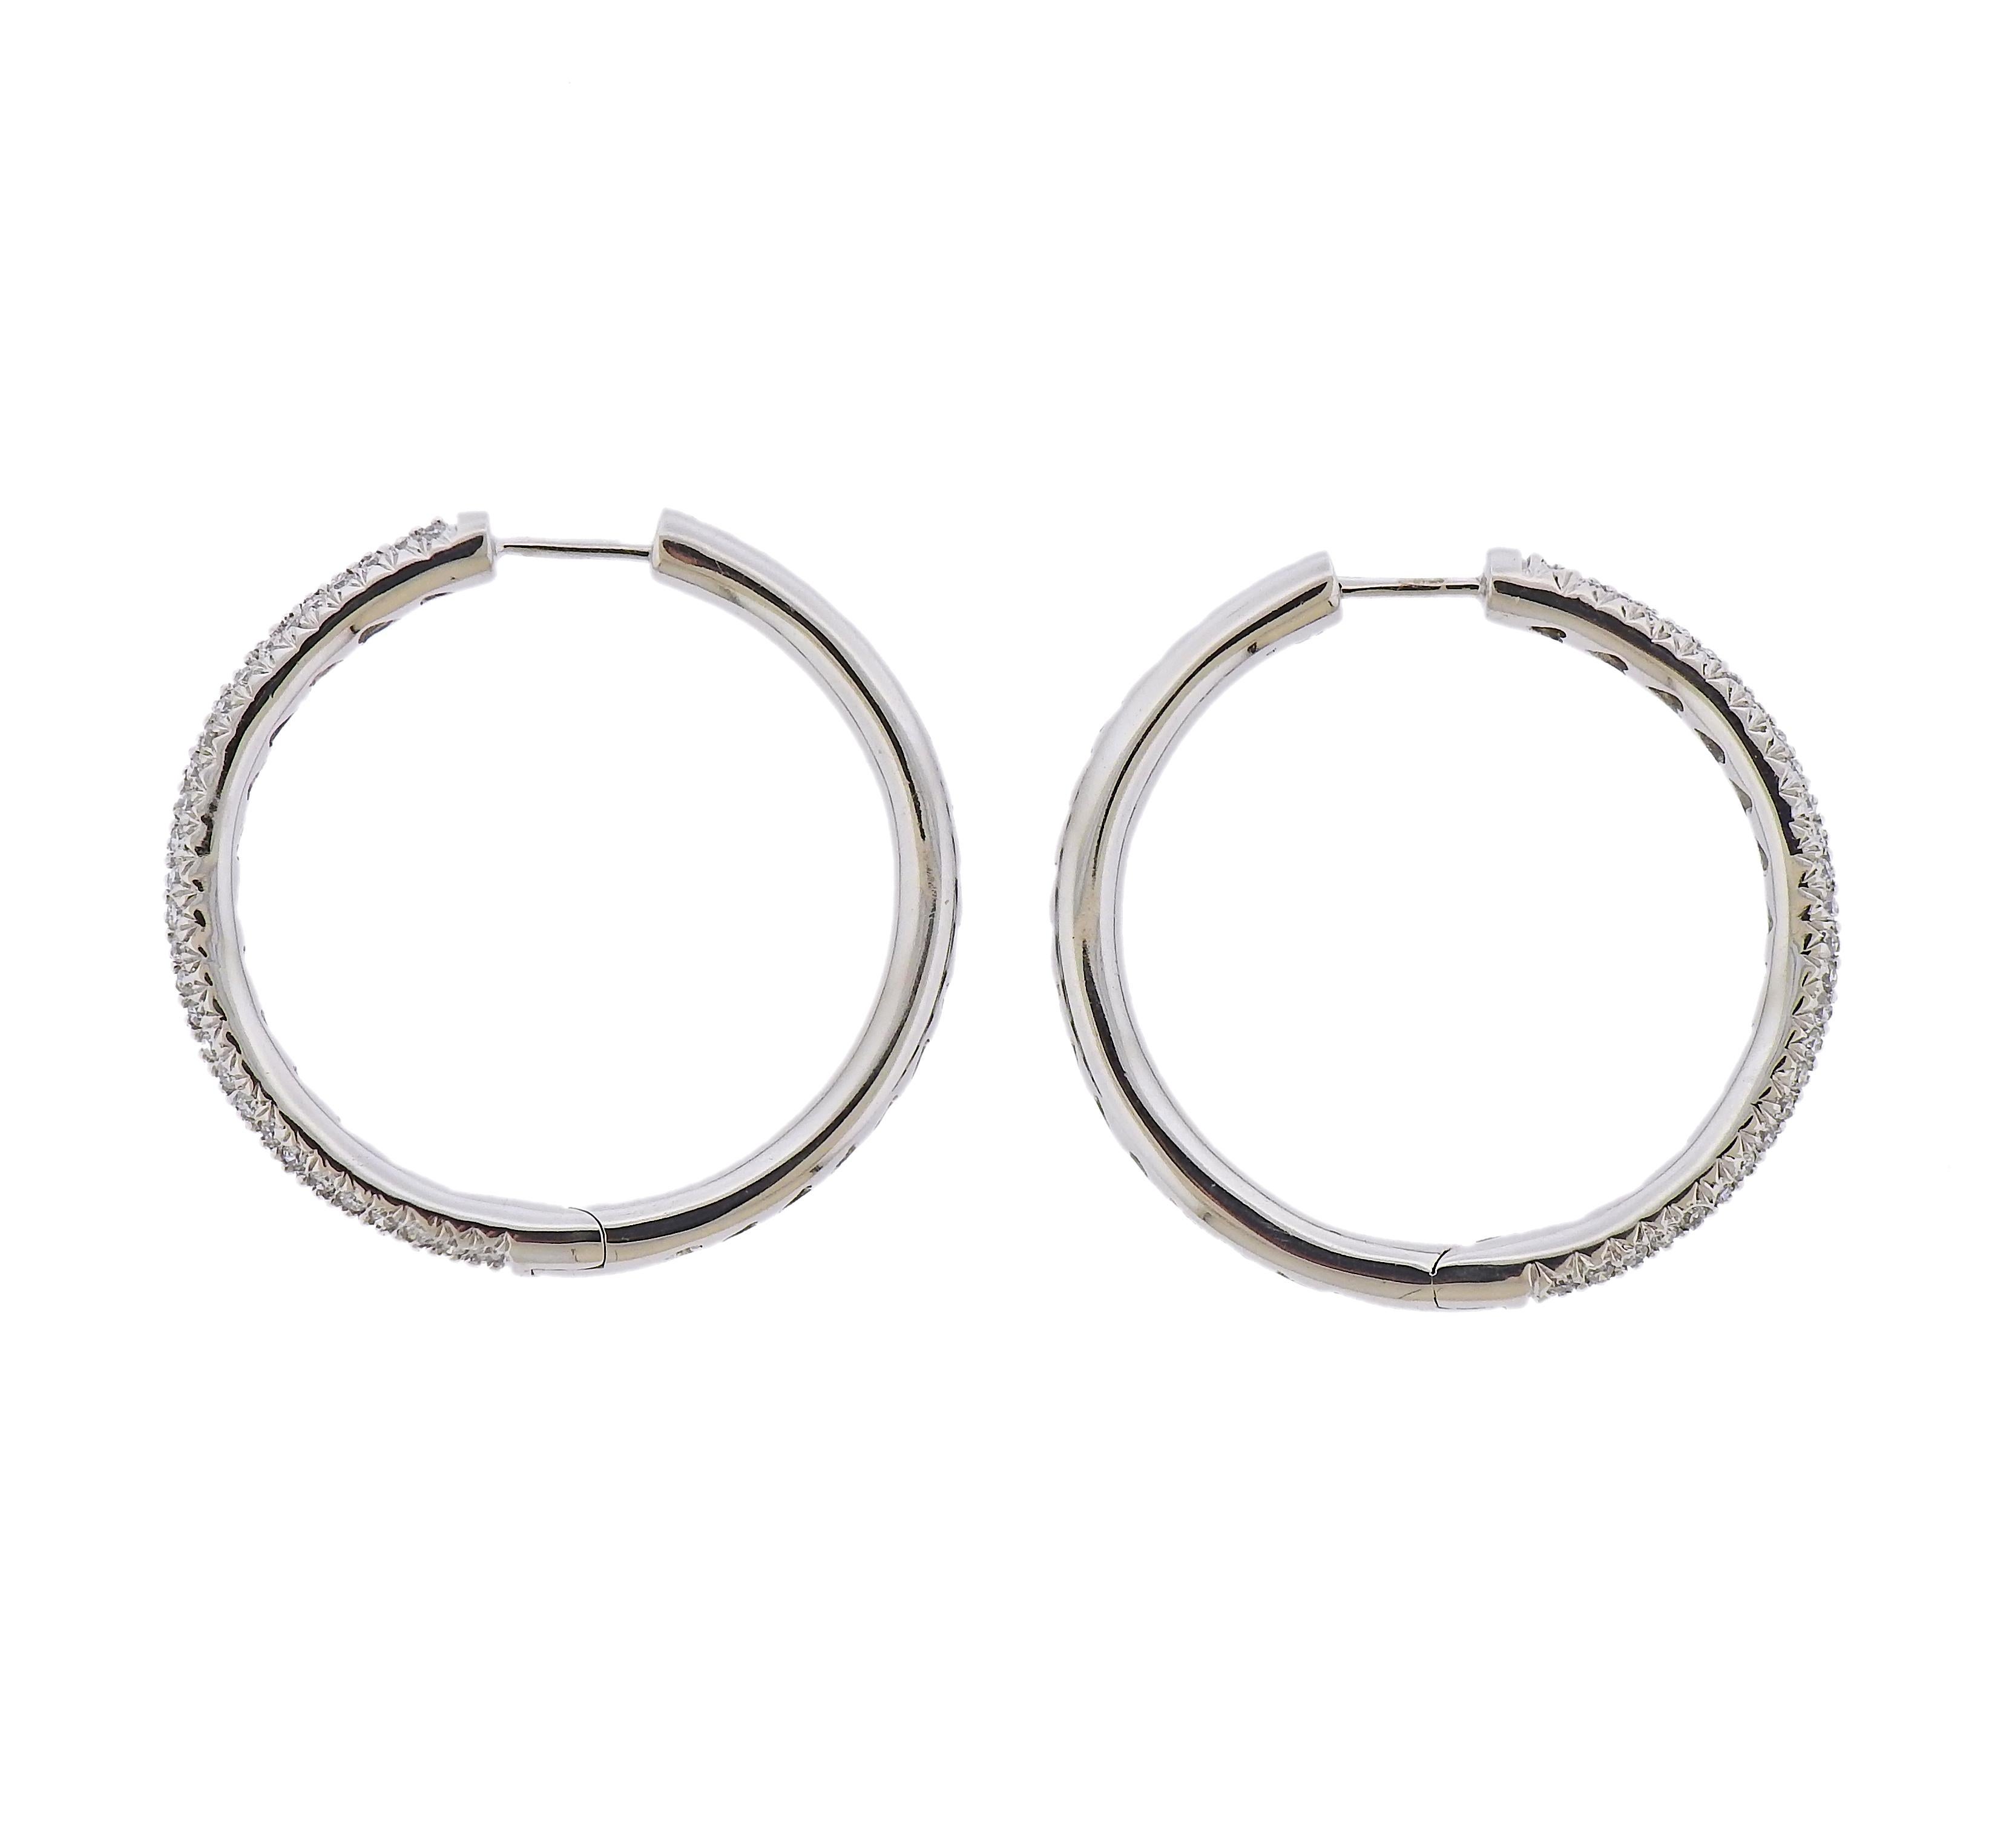  Pair of 18k white gold classic hoop earrings, set with approx. 1.00ctw in diamonds. Earrings are 30mm in diameter x 3mm wide. Marked: 750. Weight - 10.3 grams.